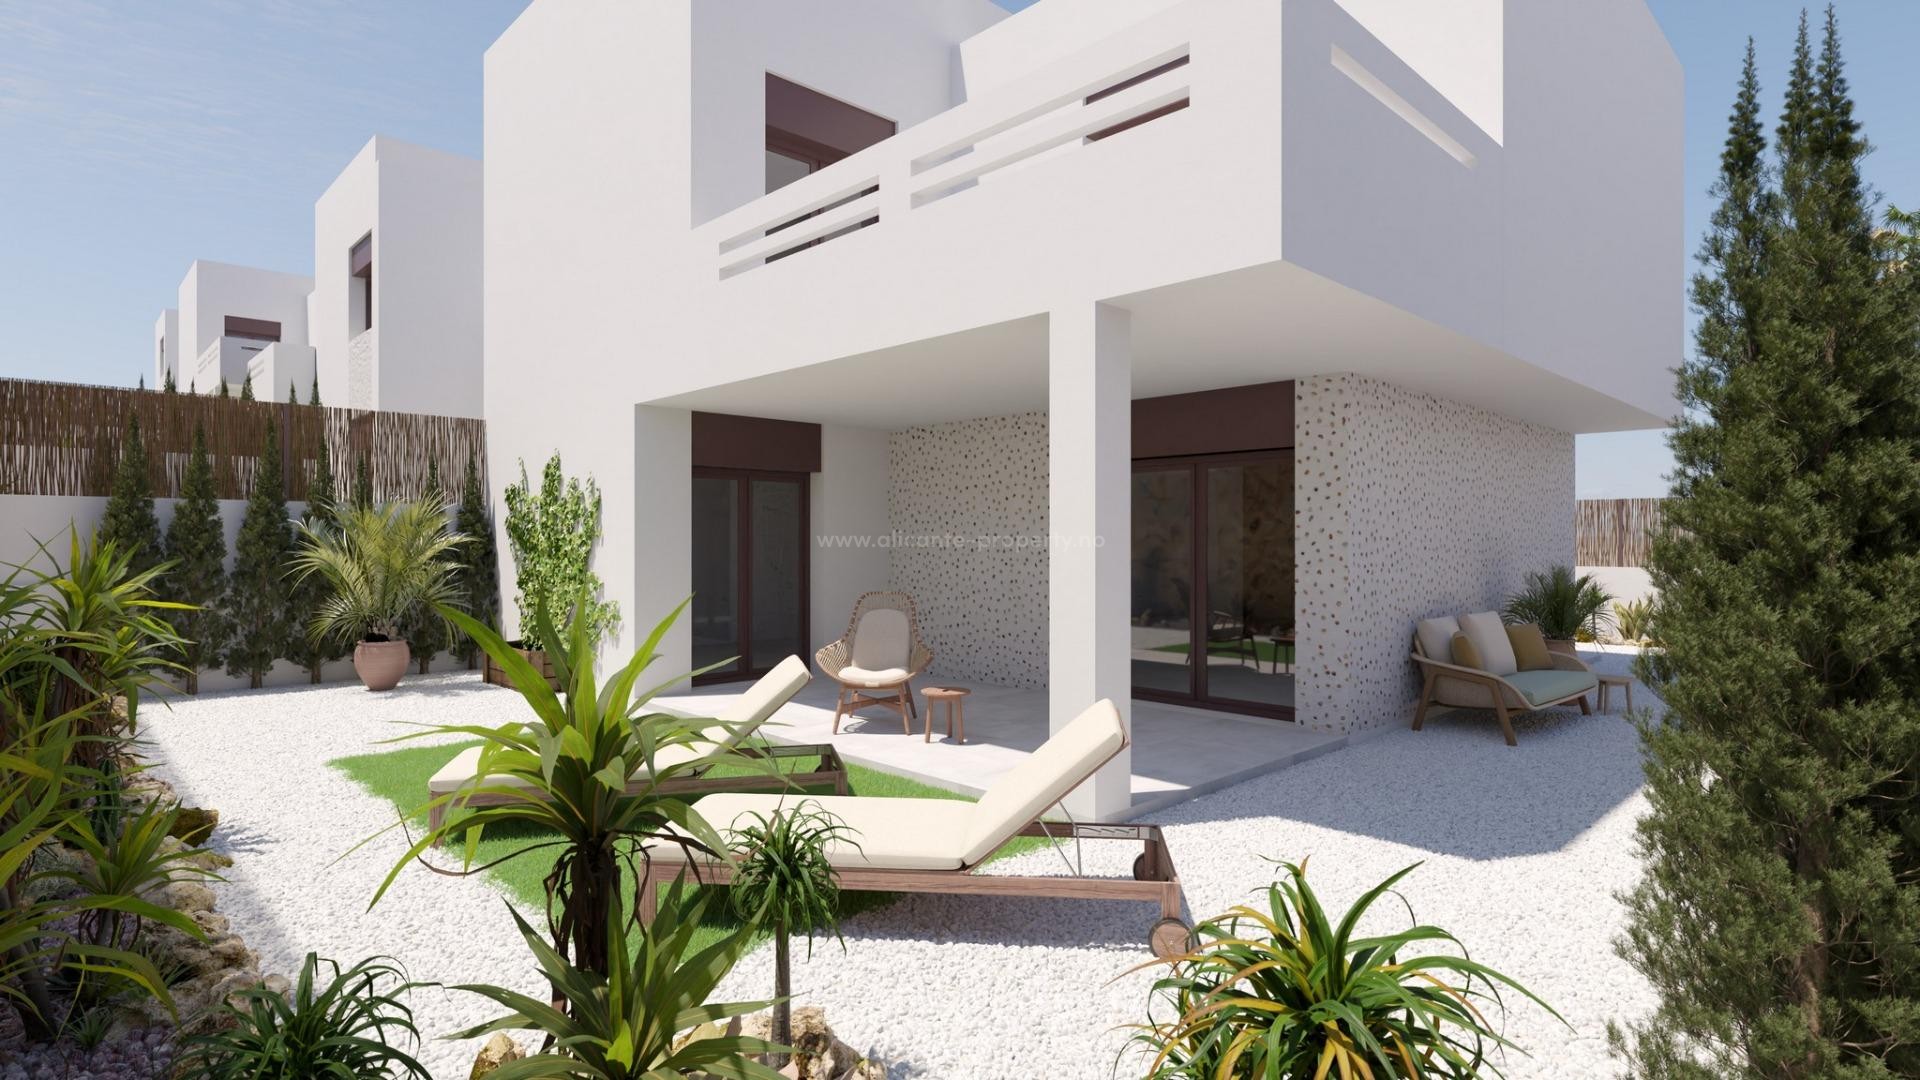 New propeties in La Finca Golf, Bungalows/apartments, 2 bedrooms, 2 bathrooms, terrace/garden or terrace/solarium. Communal pool and location on a golf course